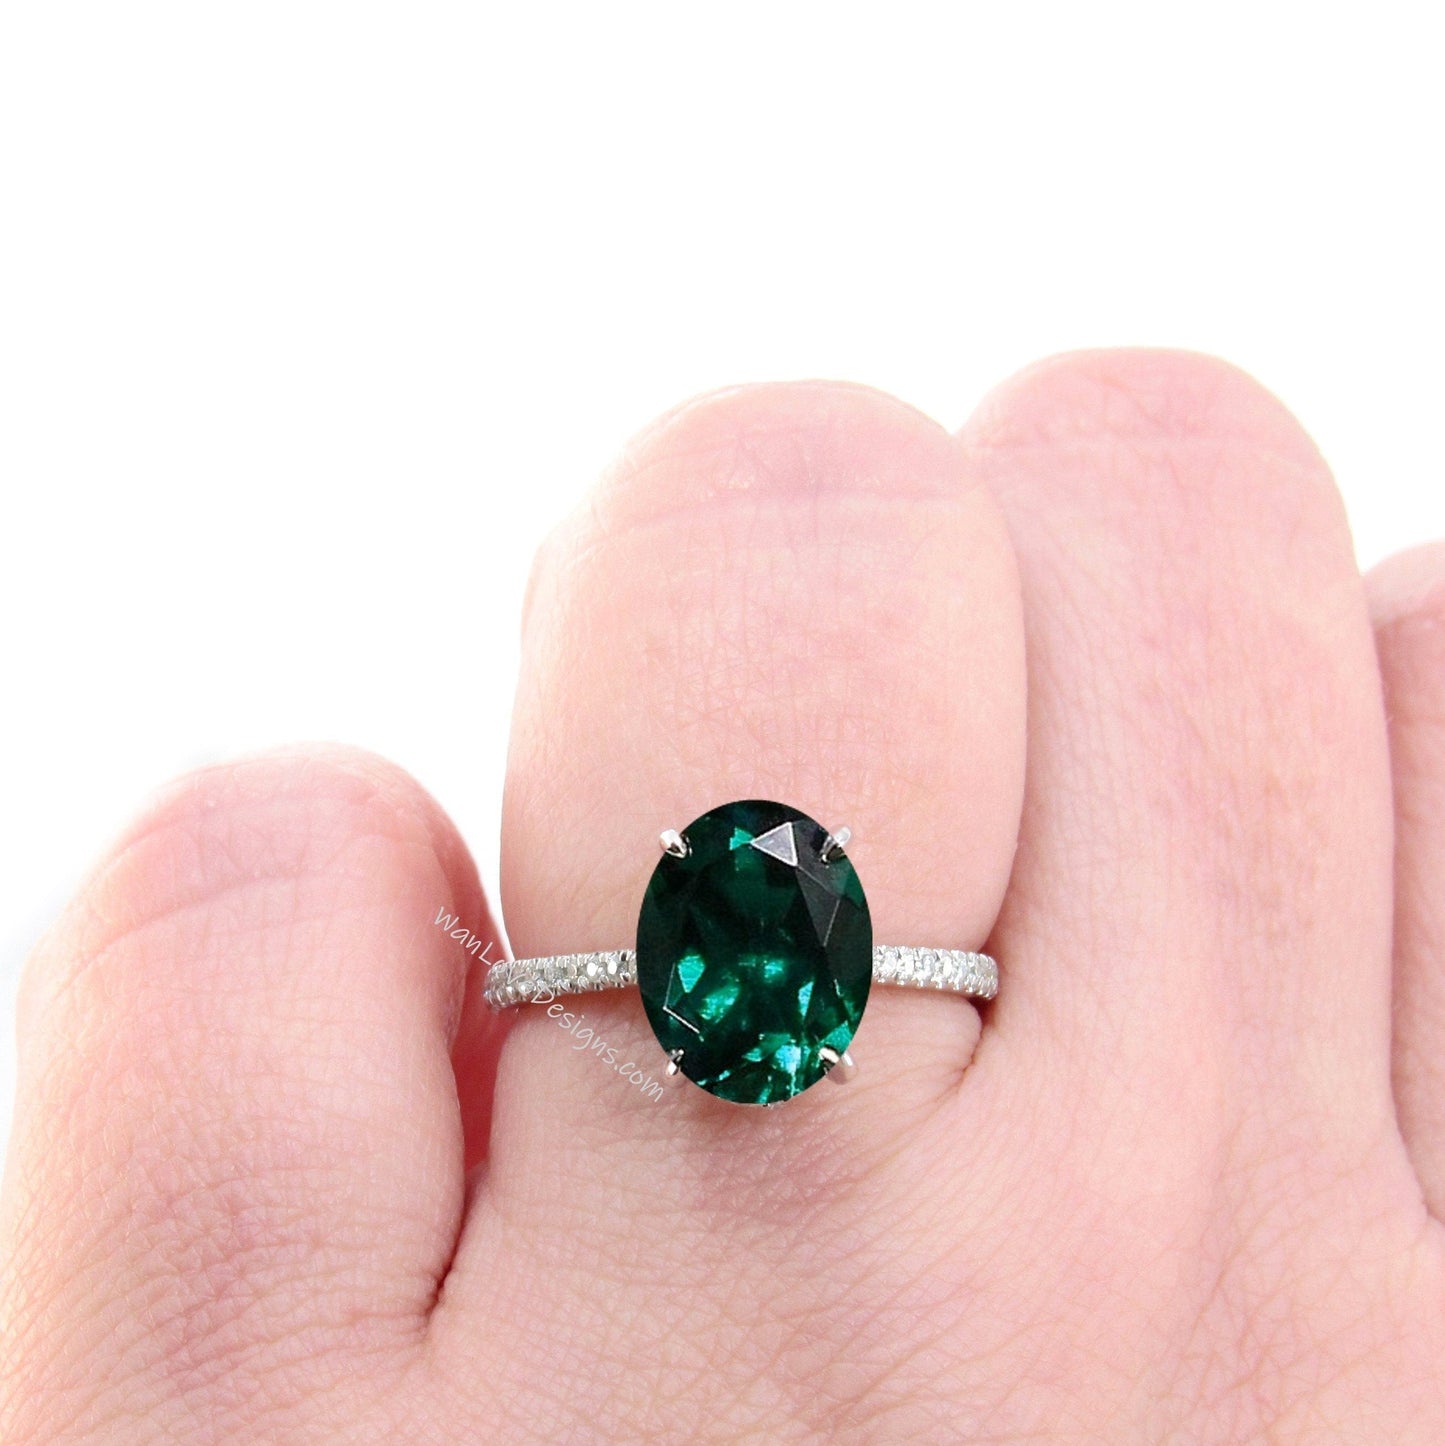 Emerald engagement ring unique Vintage oval cut diamond side halo white gold wedding Bridal birthstone Anniversary promise ring gift Wan Love Designs